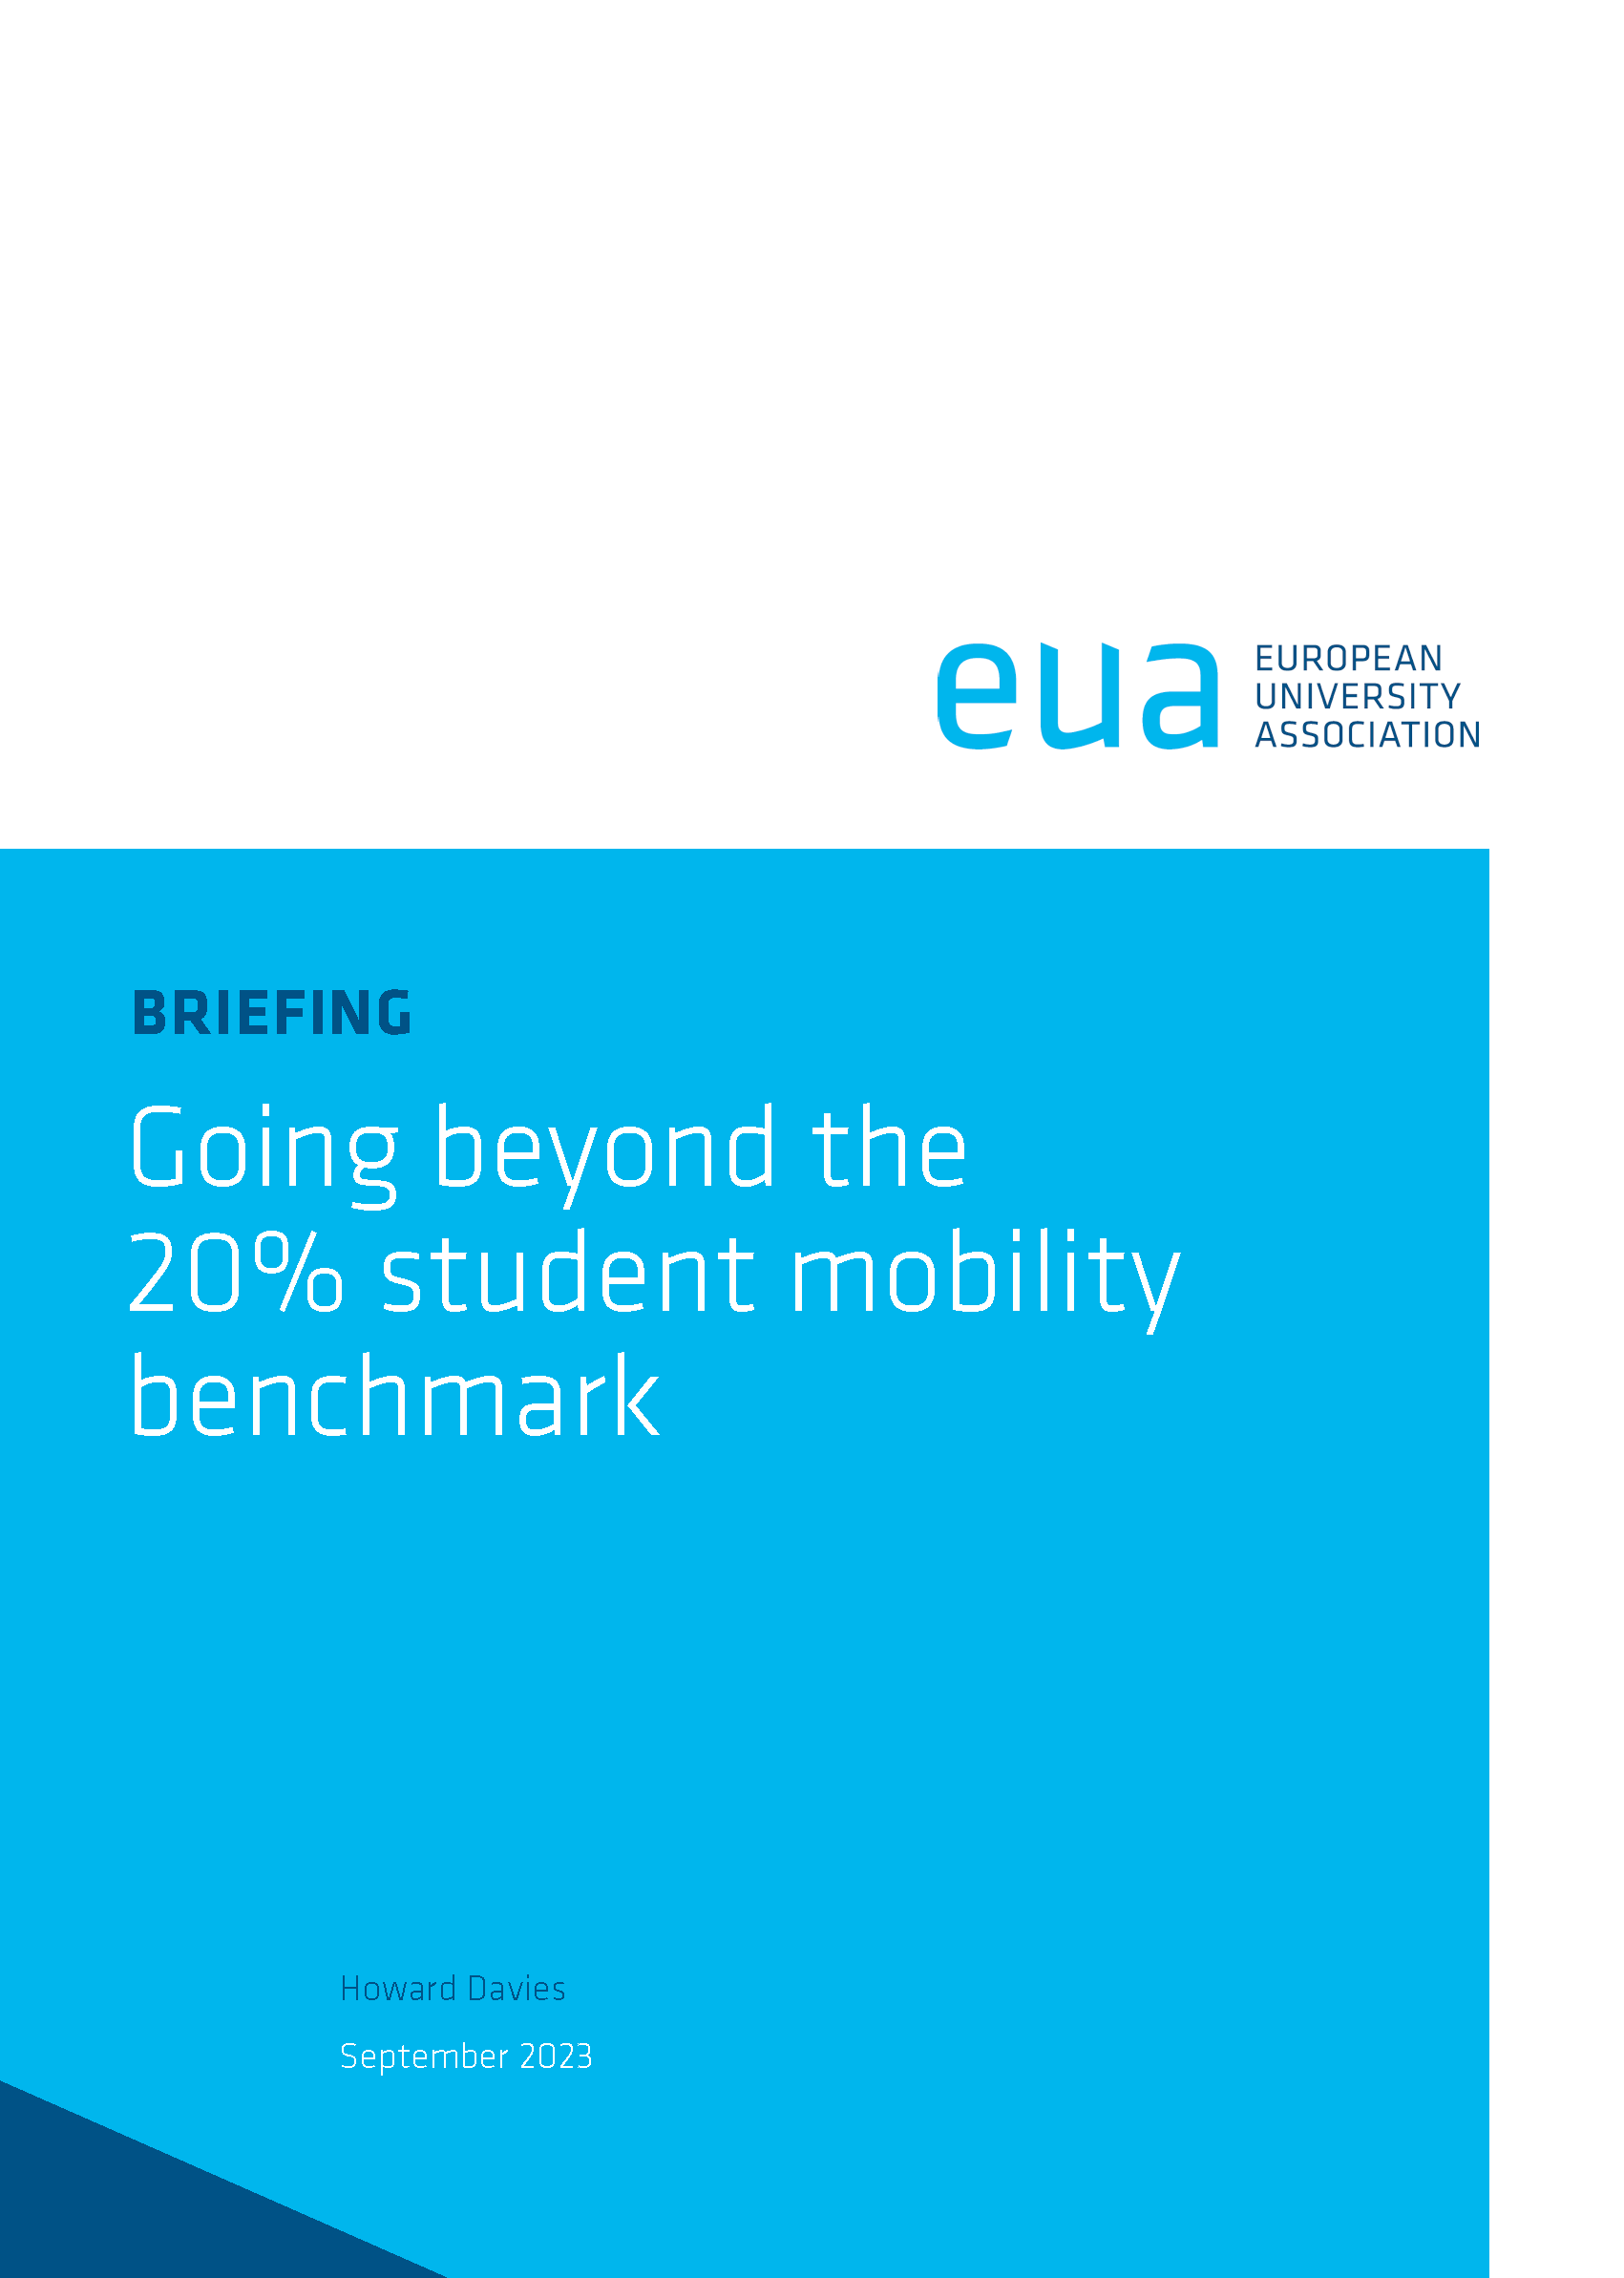 Going beyond the 20% student mobility benchmark